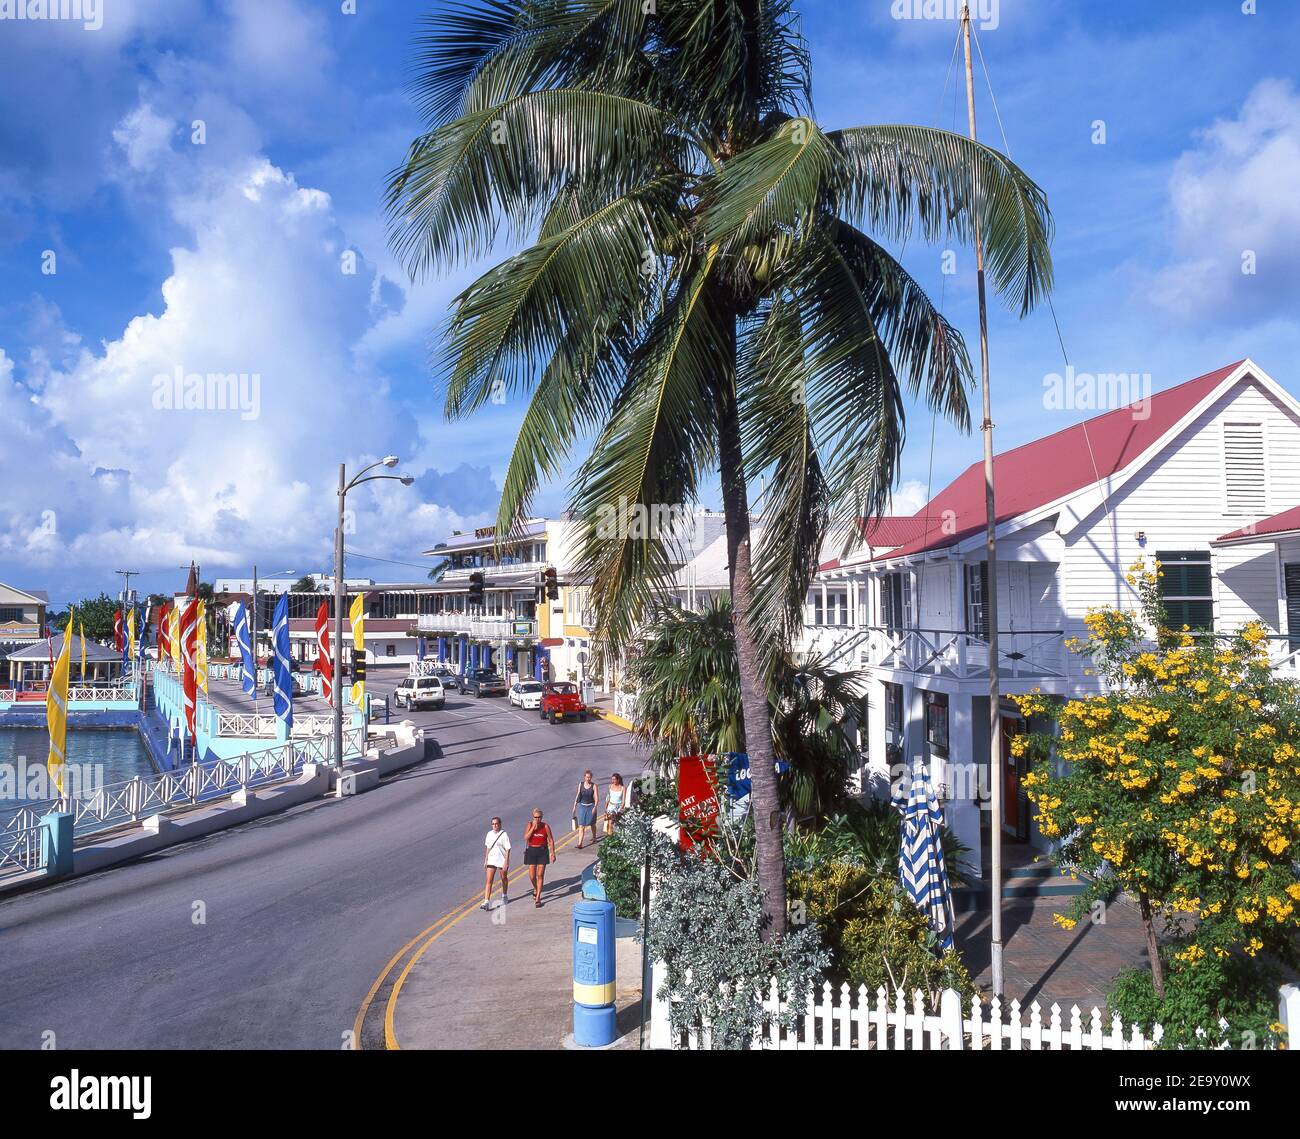 Waterfront, George Town, Grand Cayman, Cayman Islands, Caribbean Banque D'Images